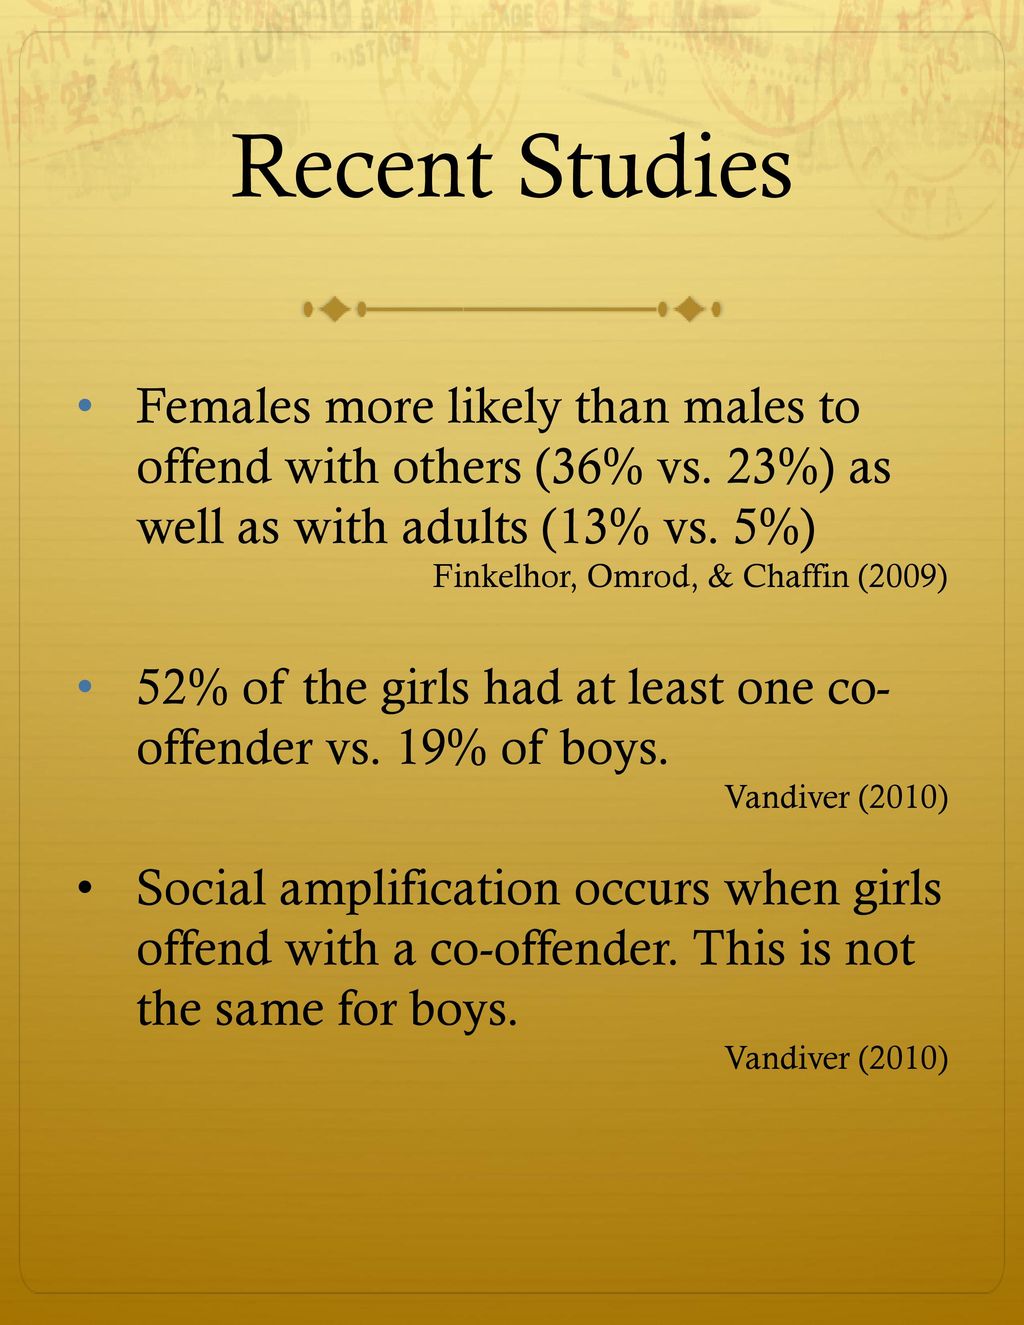 6/9/2018 Recent Studies. Females more likely than males to offend with others (36% vs. 23%) as well as with adults (13% vs. 5%)